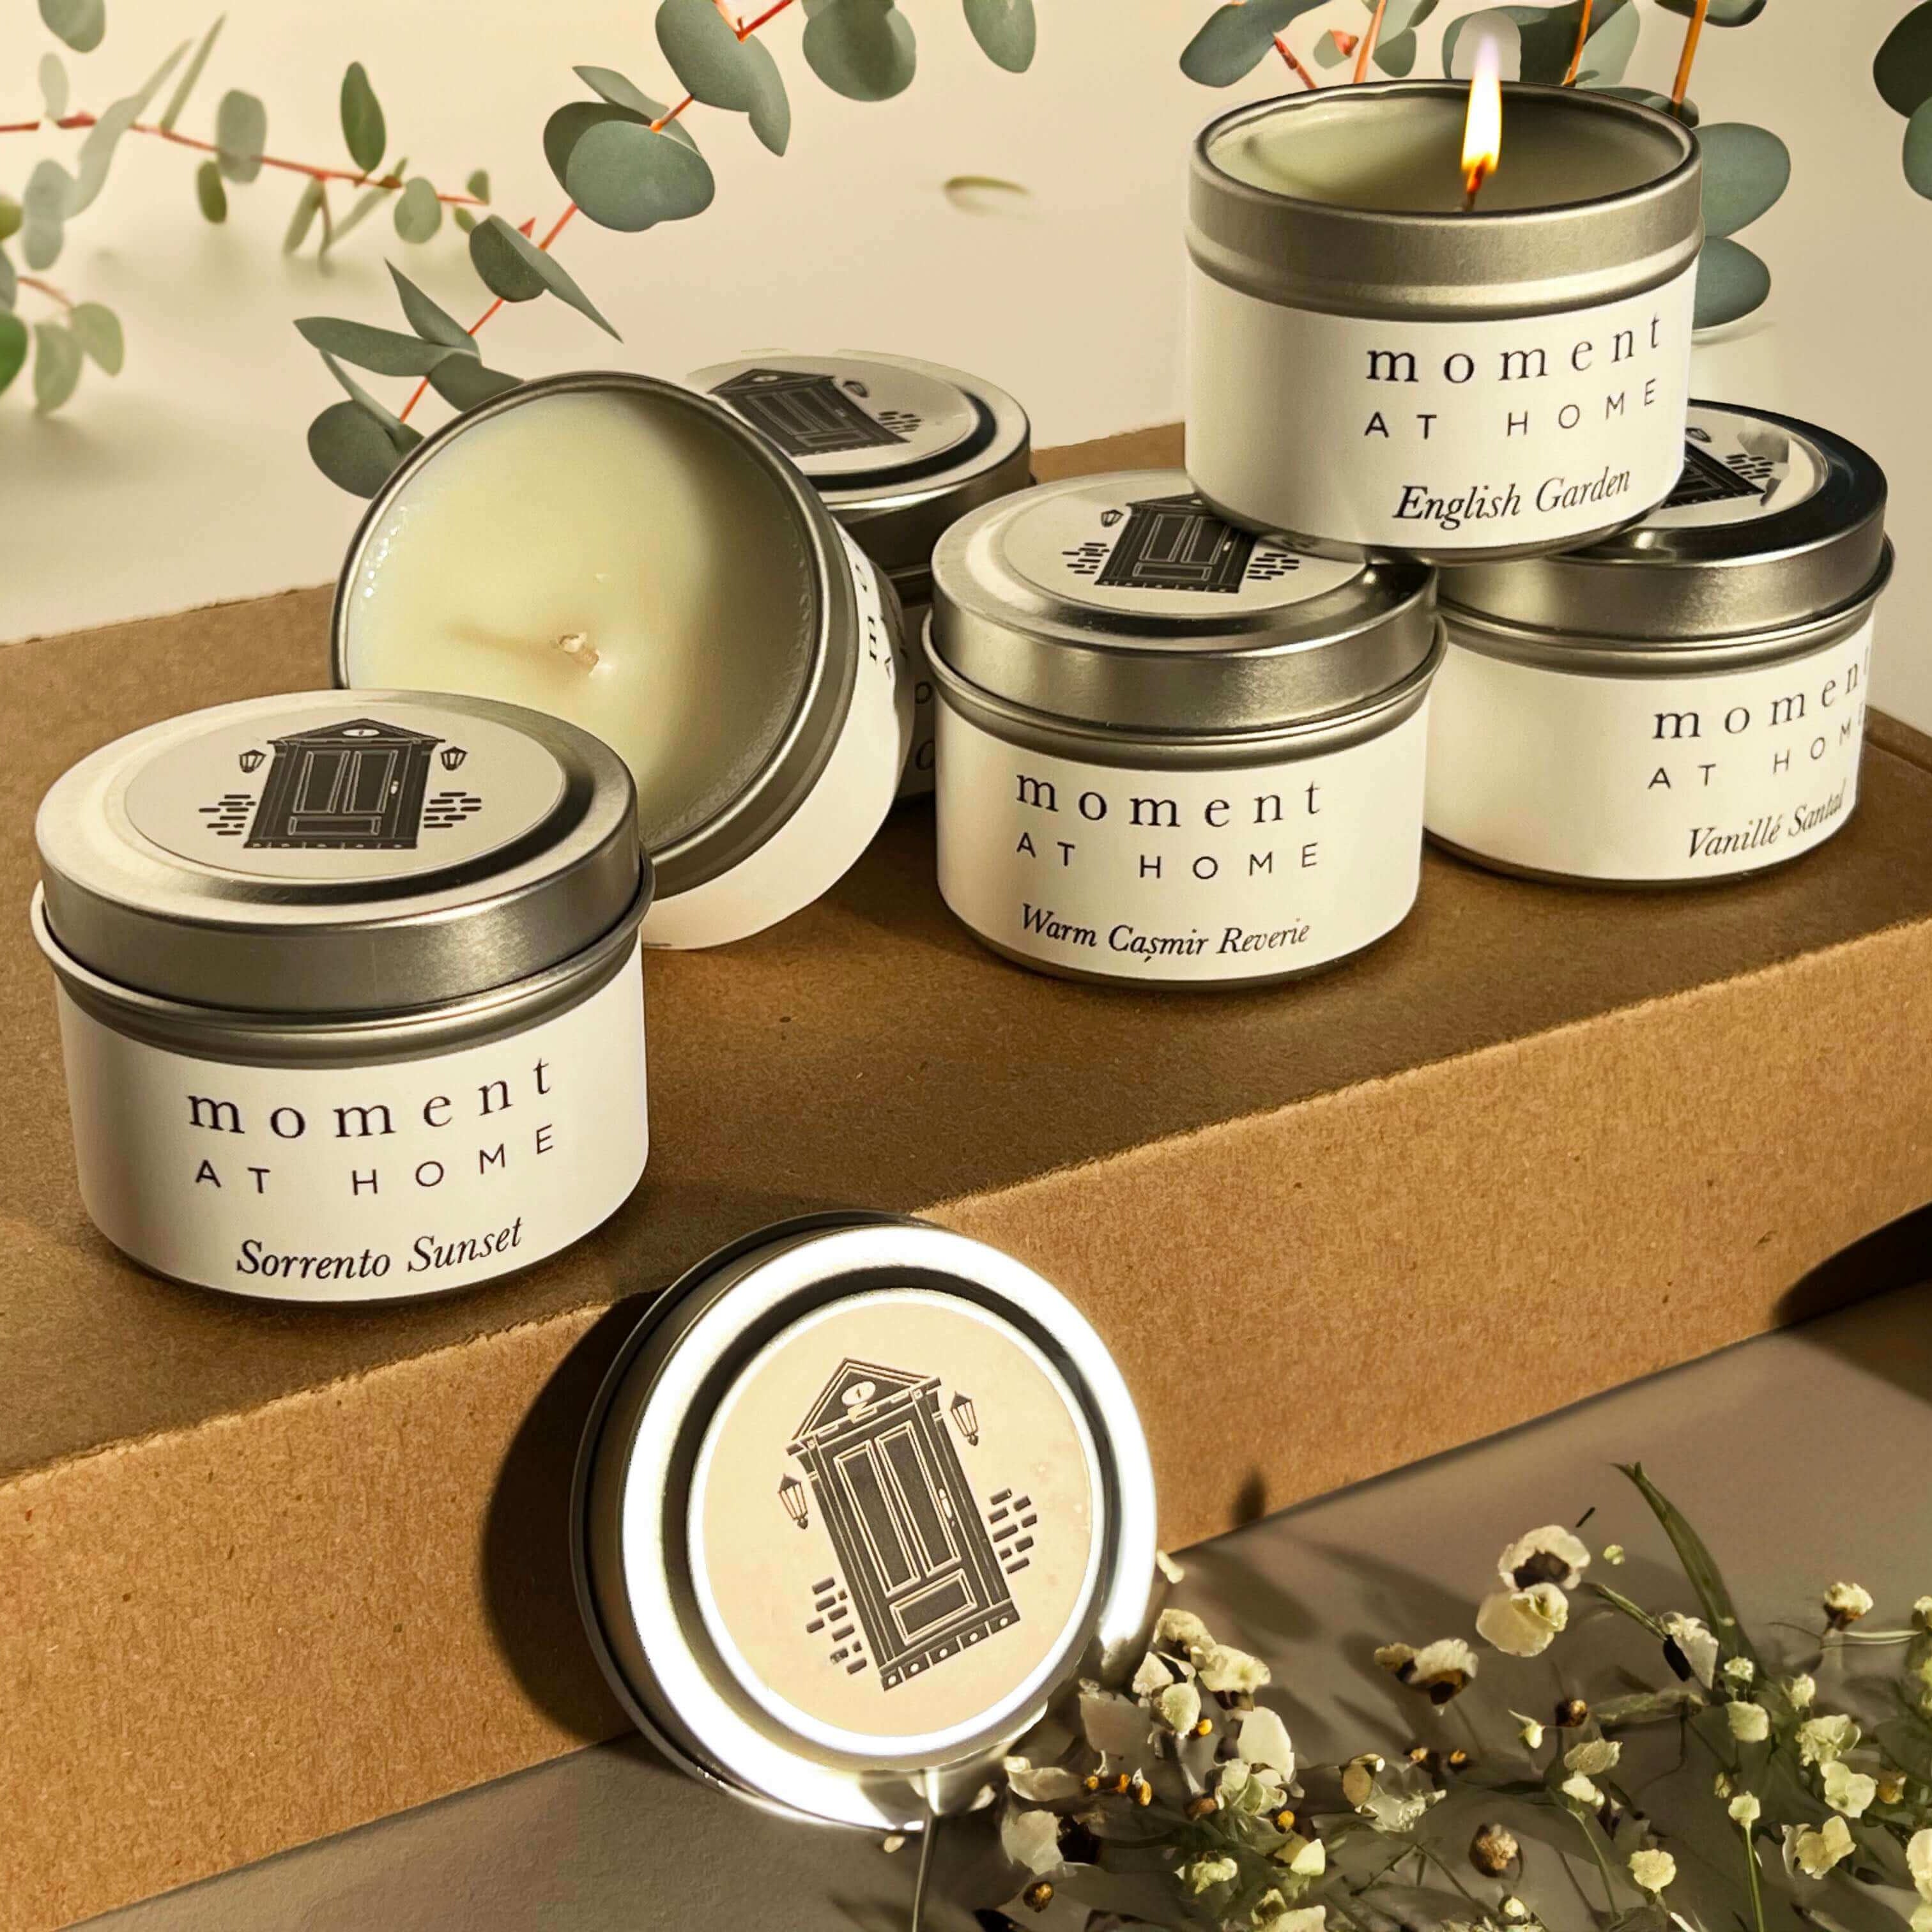 Moment At Home six piece travel tin discovery candle set.